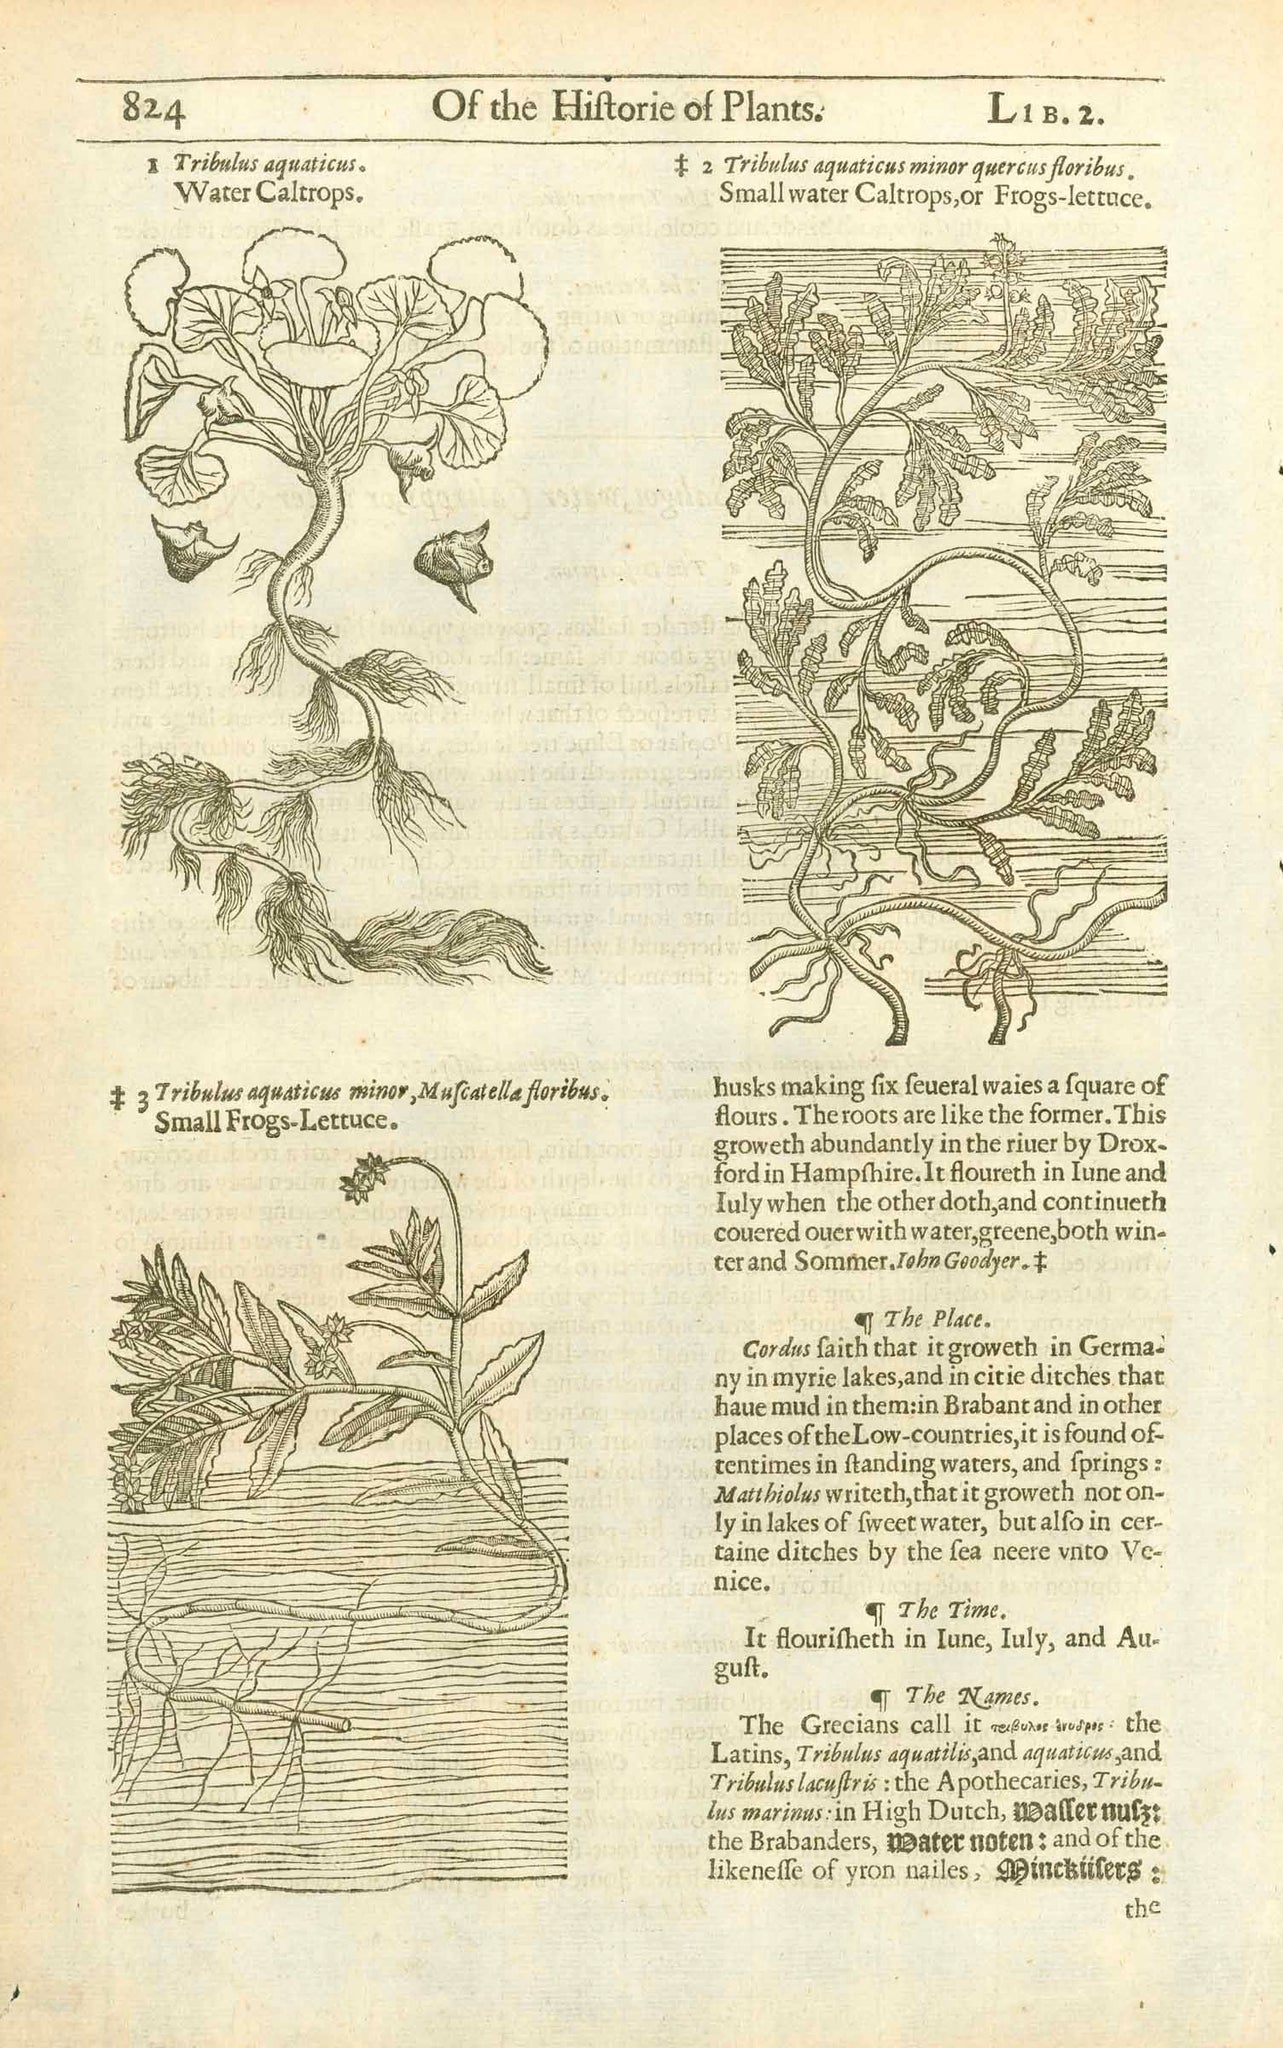 Antique woodcut by John Gerard from his "Herball" published in 1597.  Upper images: " 1. Tribulus aquaticus. Water Caltrops" " 2. Tribulus aquaticus minor quercus flribus" "Small water Caltrops, or Frogs-lettuce." Lower image: 3. "Tribulus Aquaticus minor, Muscatella floribus." "Small frogs-lettuce."  On the reverse side is text about Water Saligot , water Caltrops, or water Nuts.  The entire work contines text about the medicinal uses of each plant. 